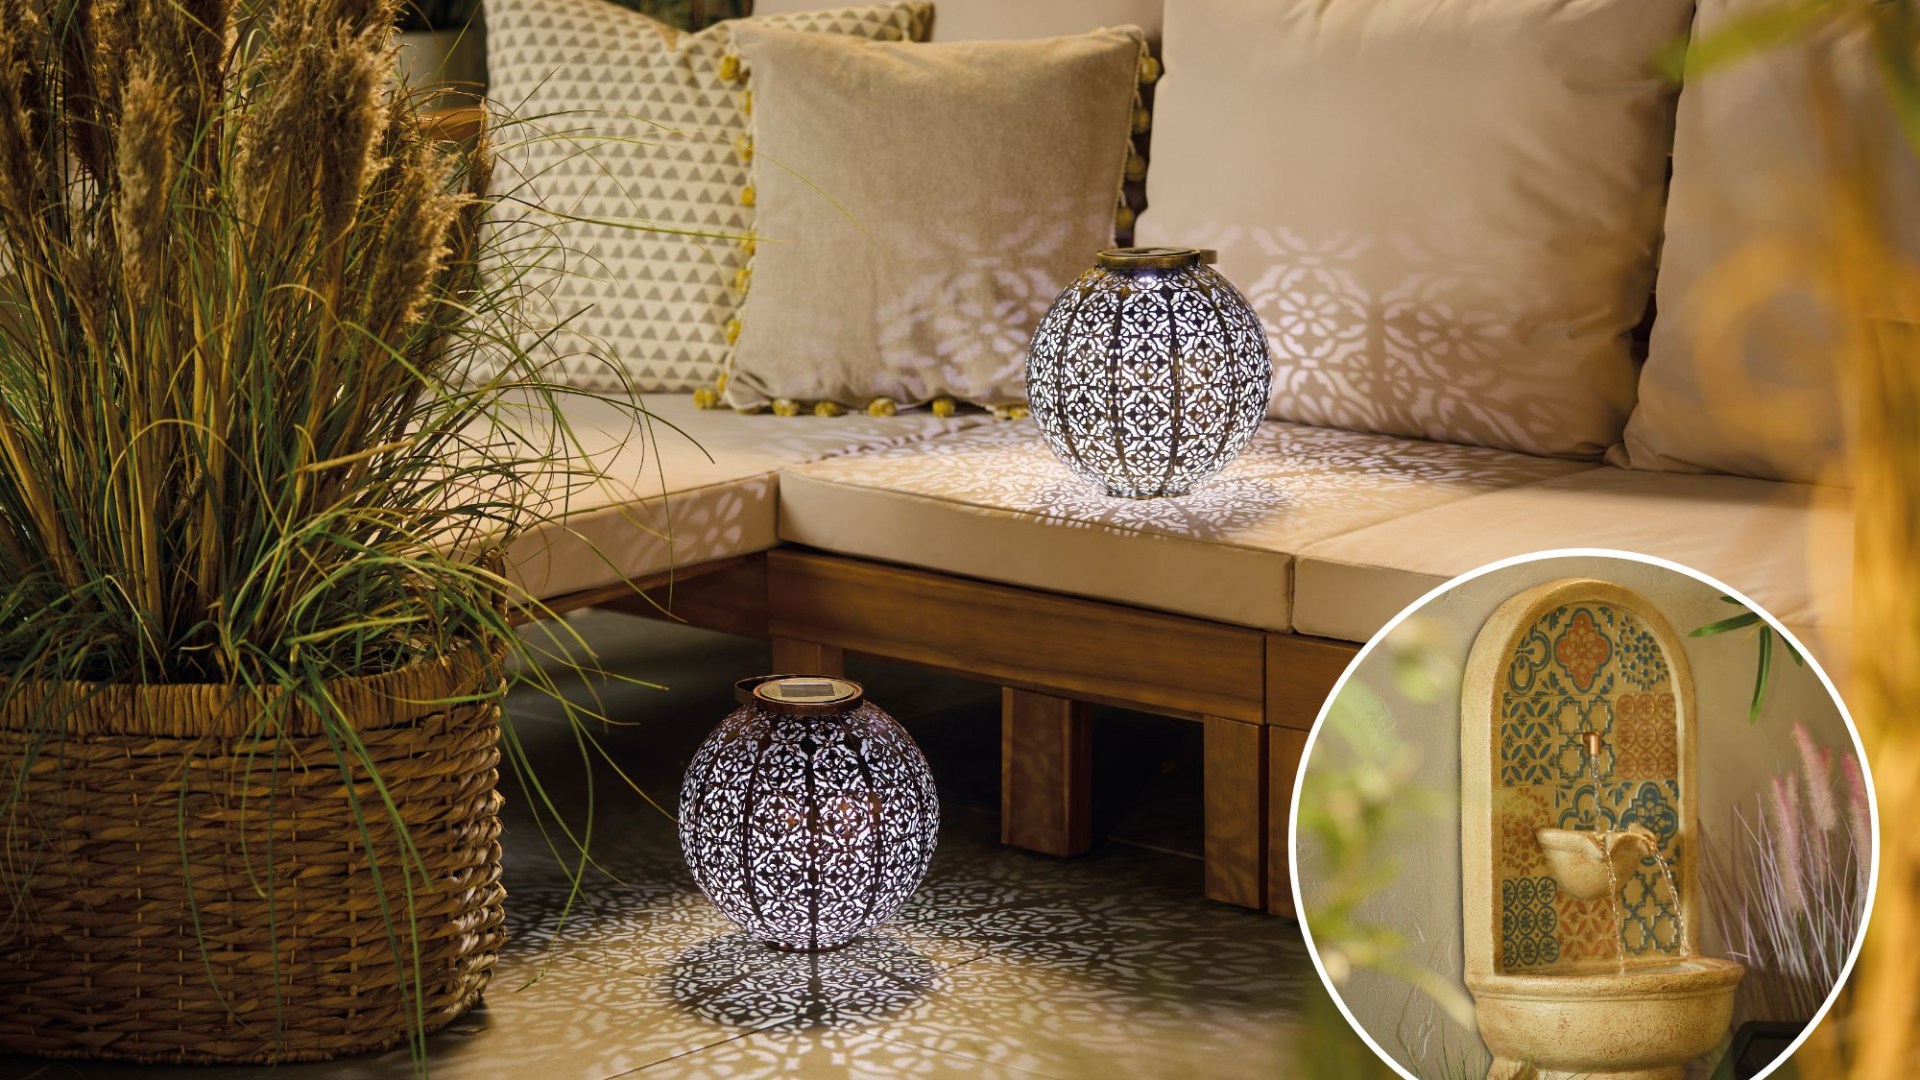 Aldi launching bargain garden range in days – with Moroccan lanterns, a gorgeous mosaic water feature & 2.49 prices [Video]